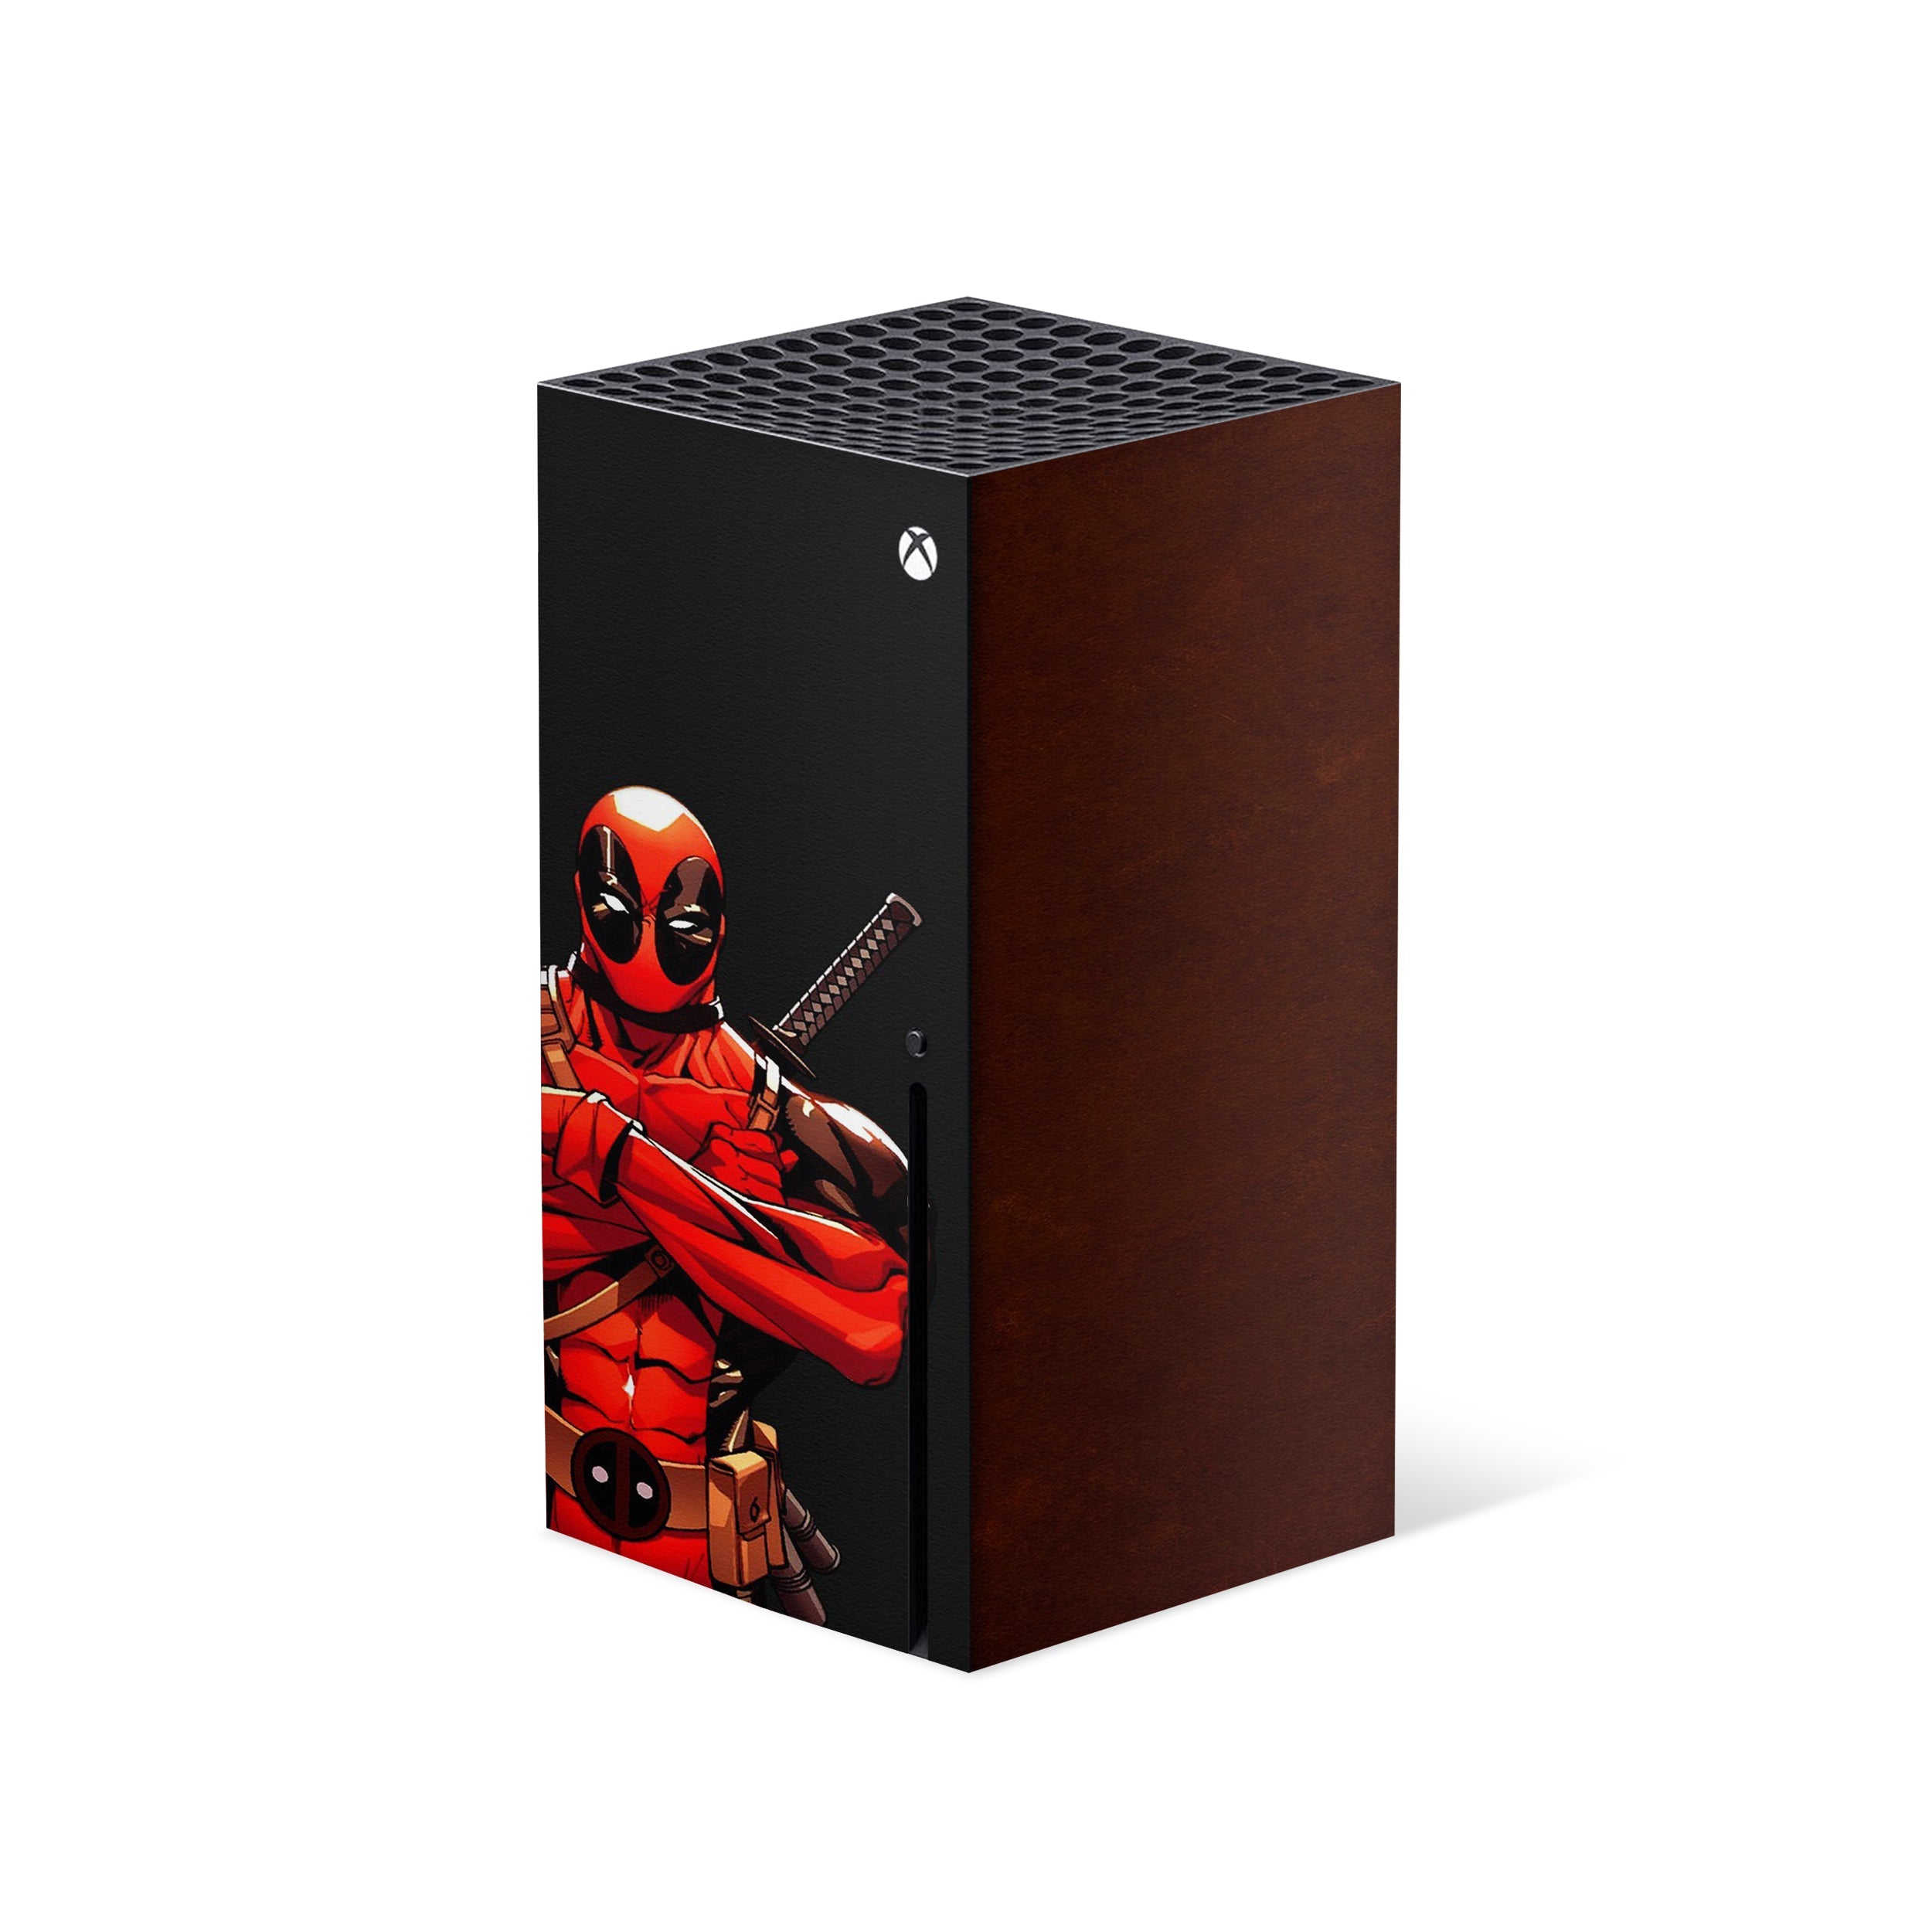 A video game skin featuring a Marvel Comics Deadpool design for the Xbox Series X.